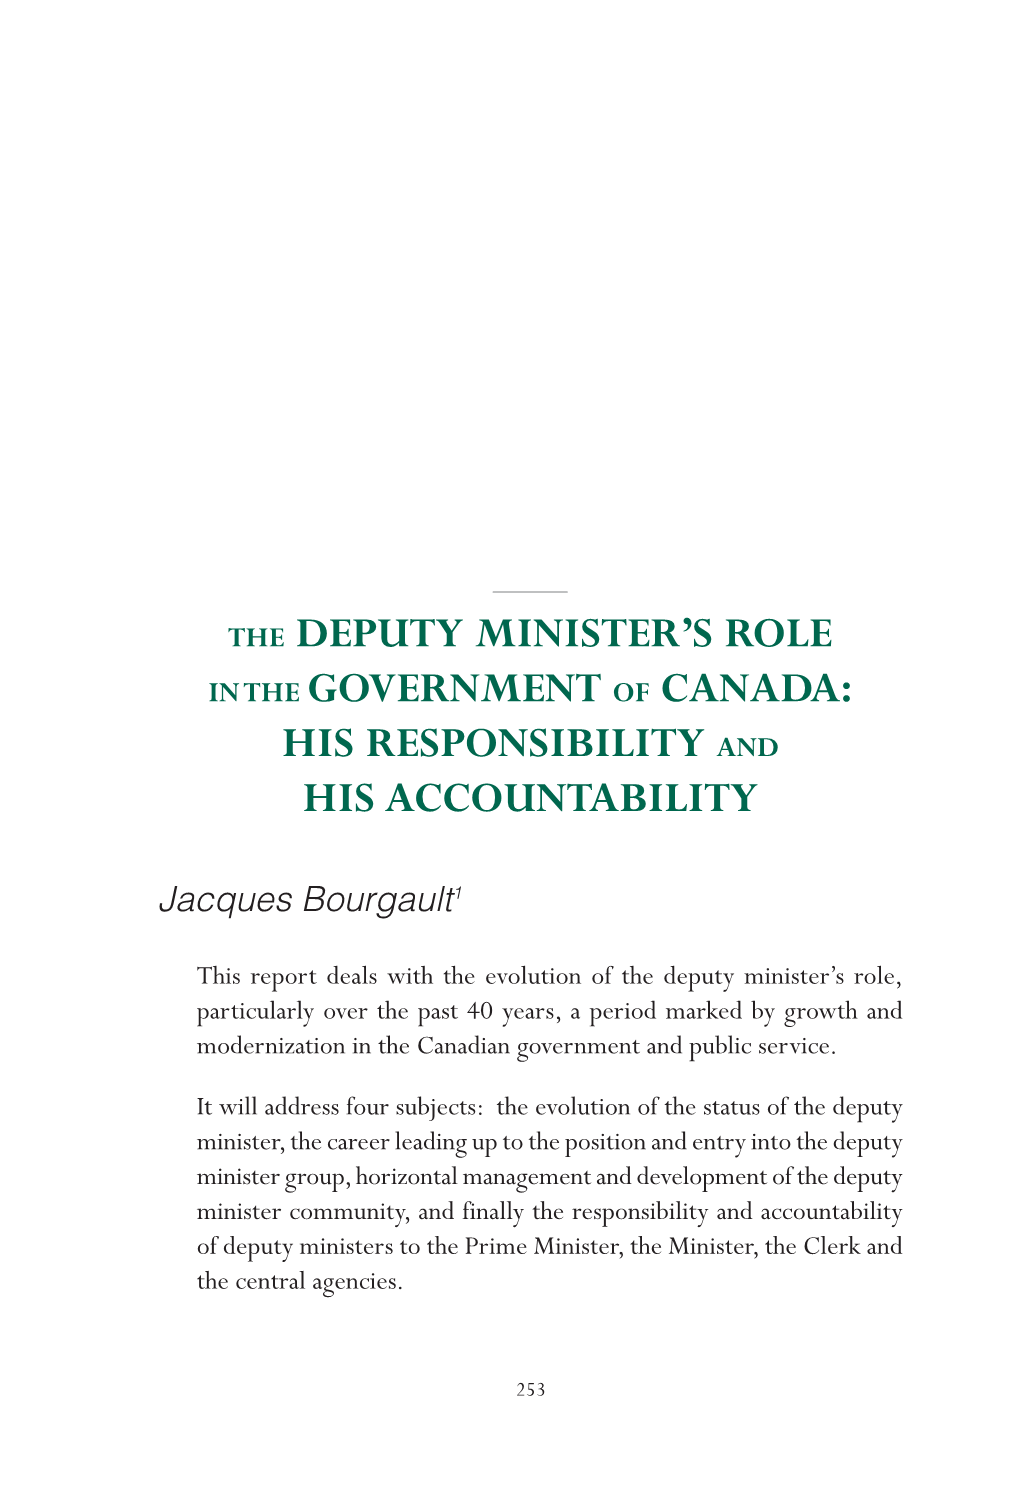 The Deputy Minister's Role in the Government of Canada